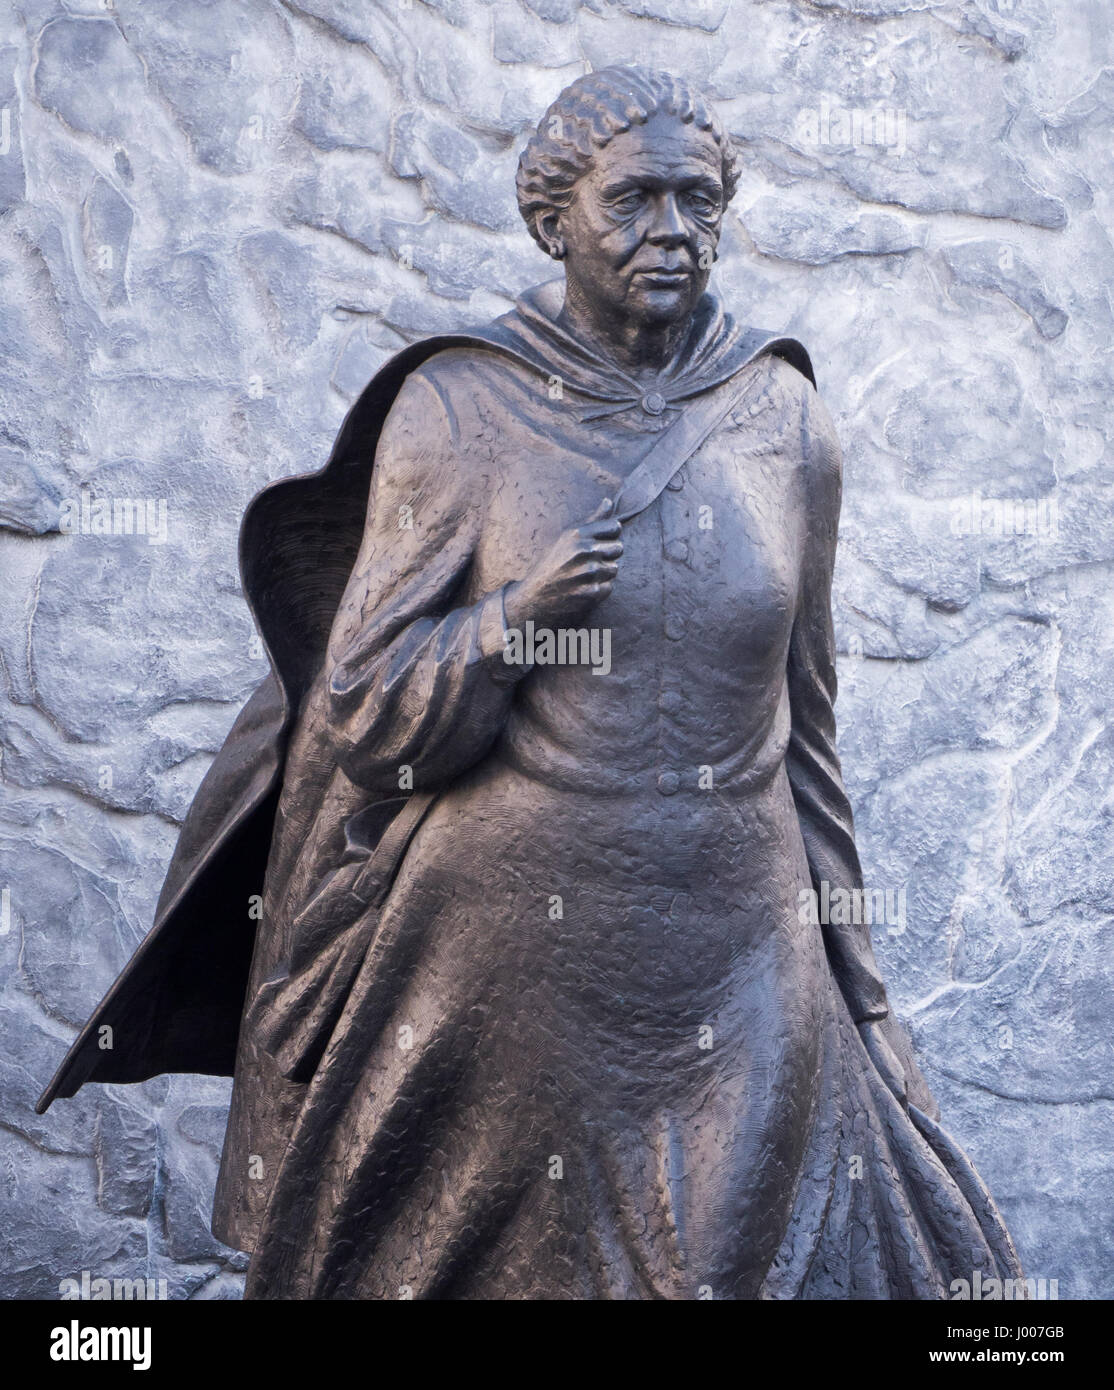 Statue of Mary Seacole outside St Thomas' Hospital London, born Jamaica 1805, famous for nursing sick and wounded soldiers during the Crimean War, Stock Photo